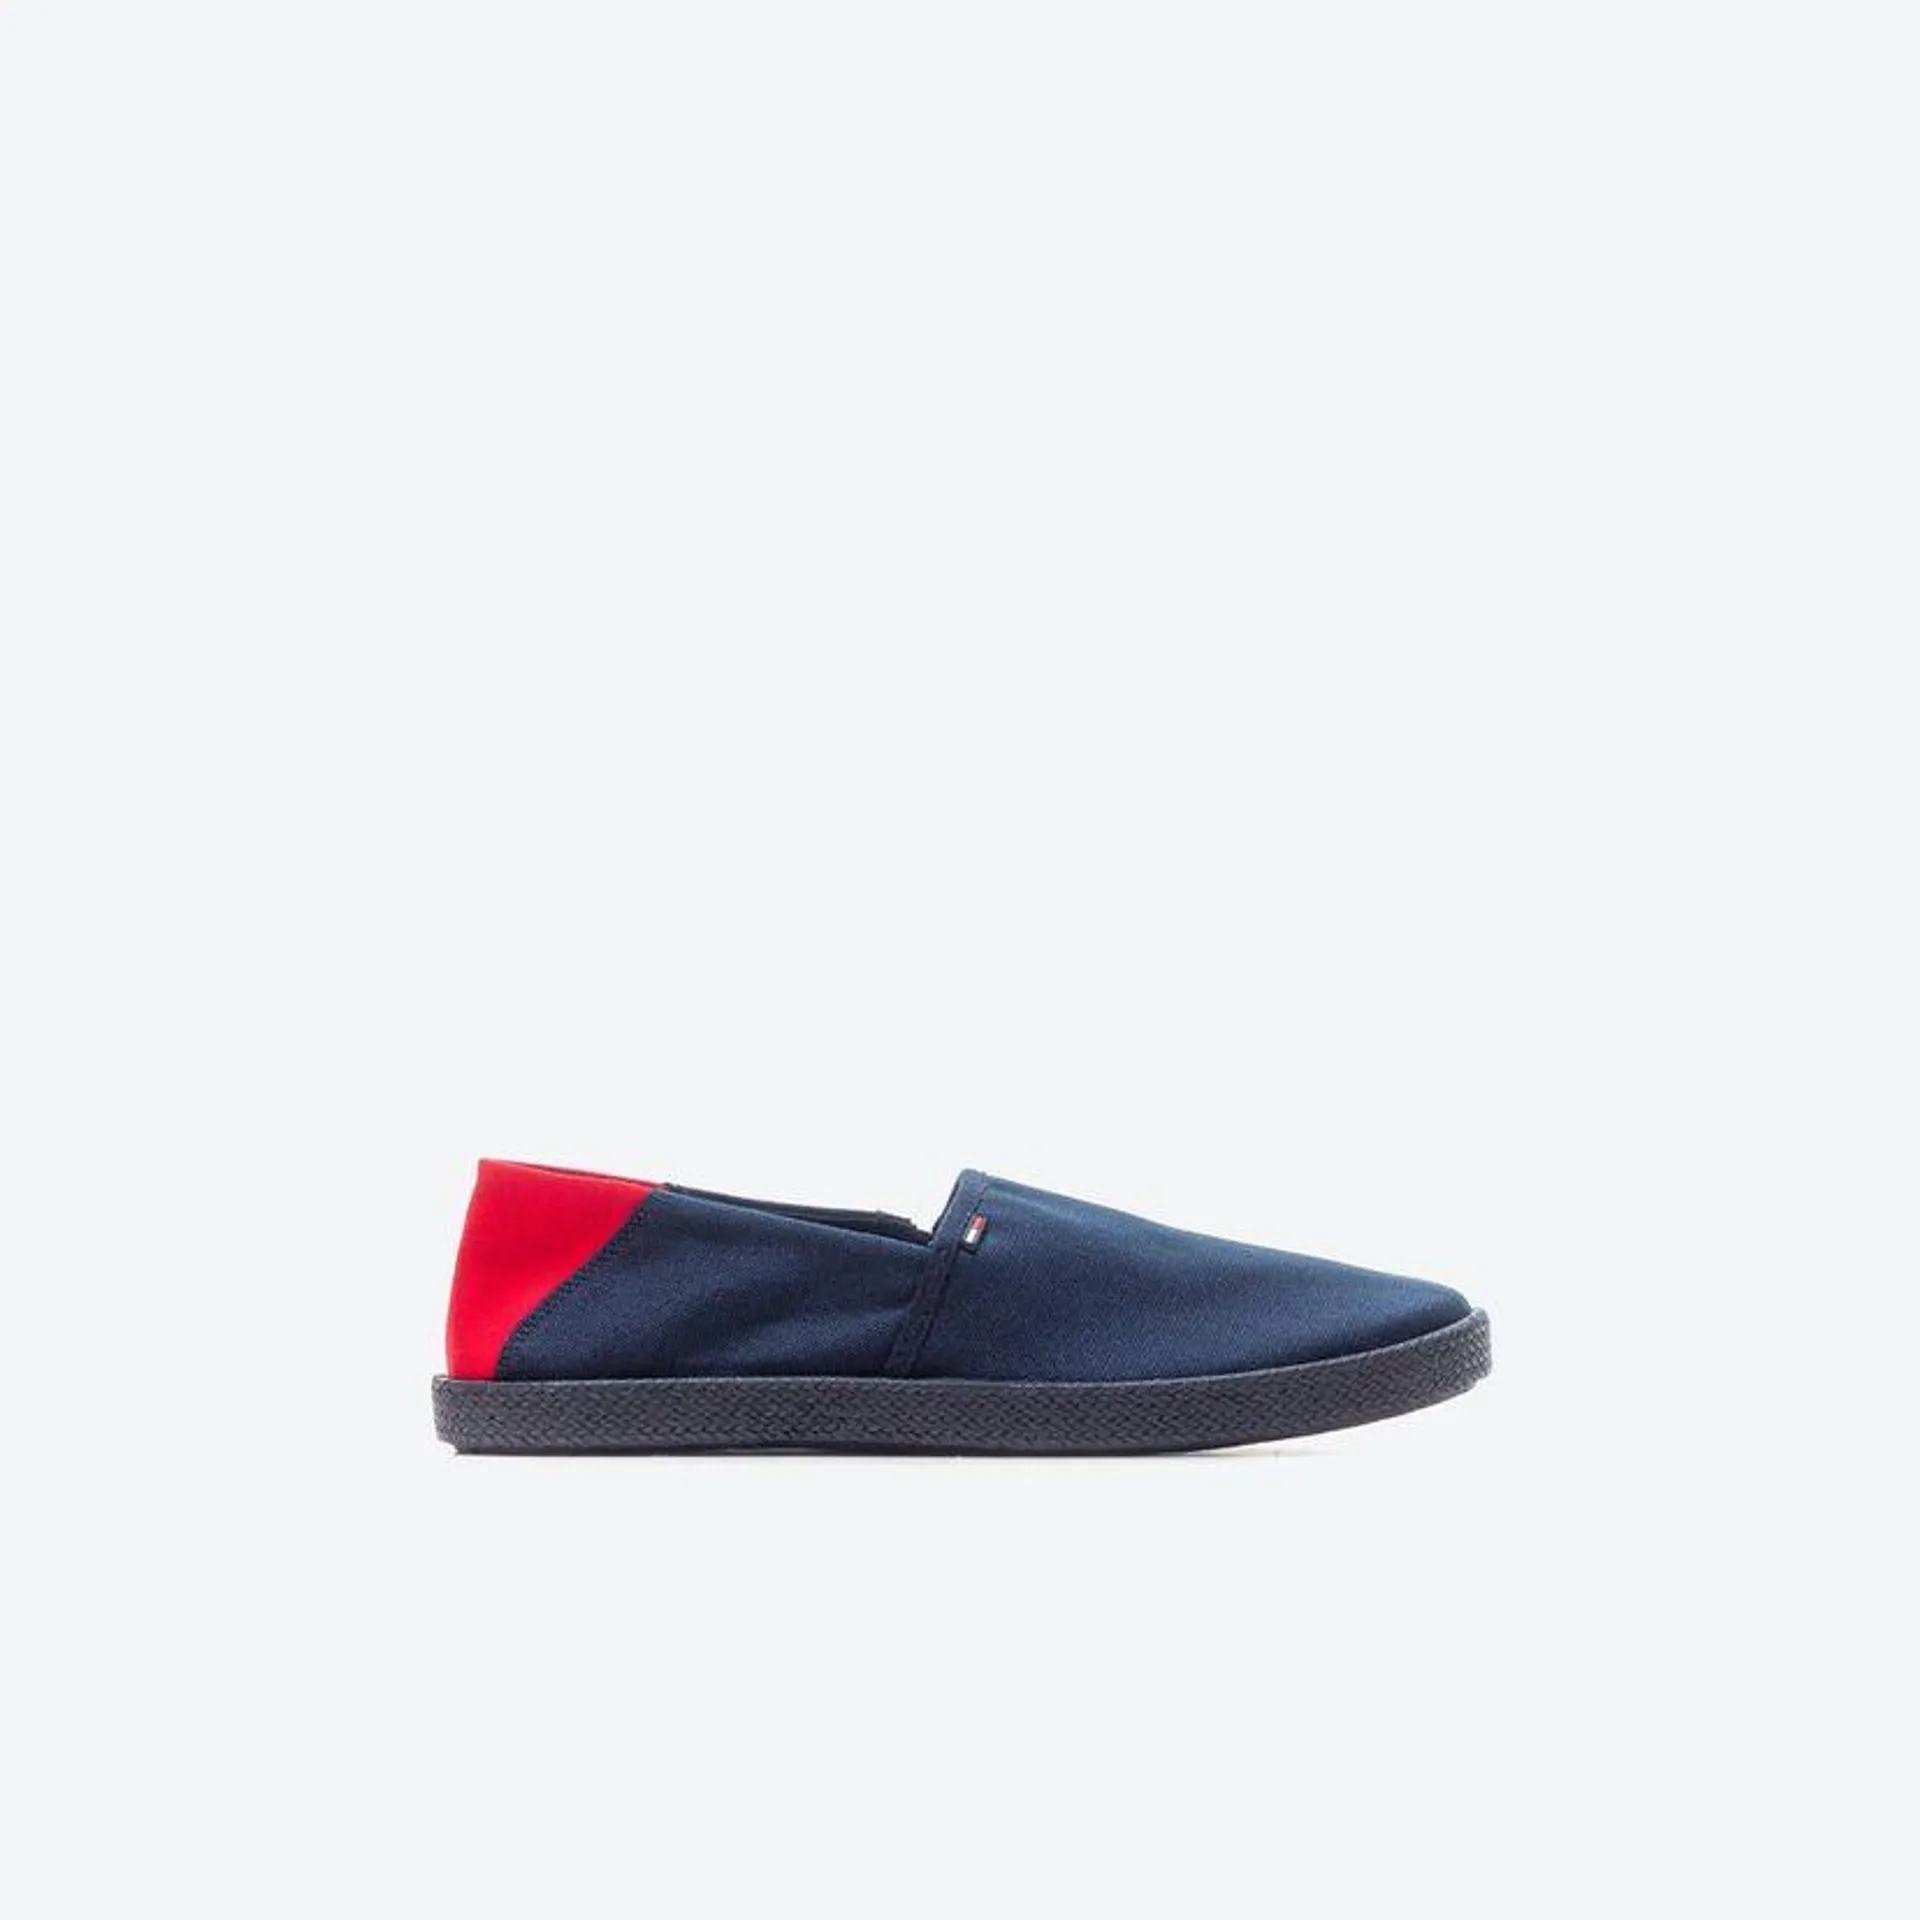 Zapato Casual Hombre Tommy Shoes Zncp Azul Naval